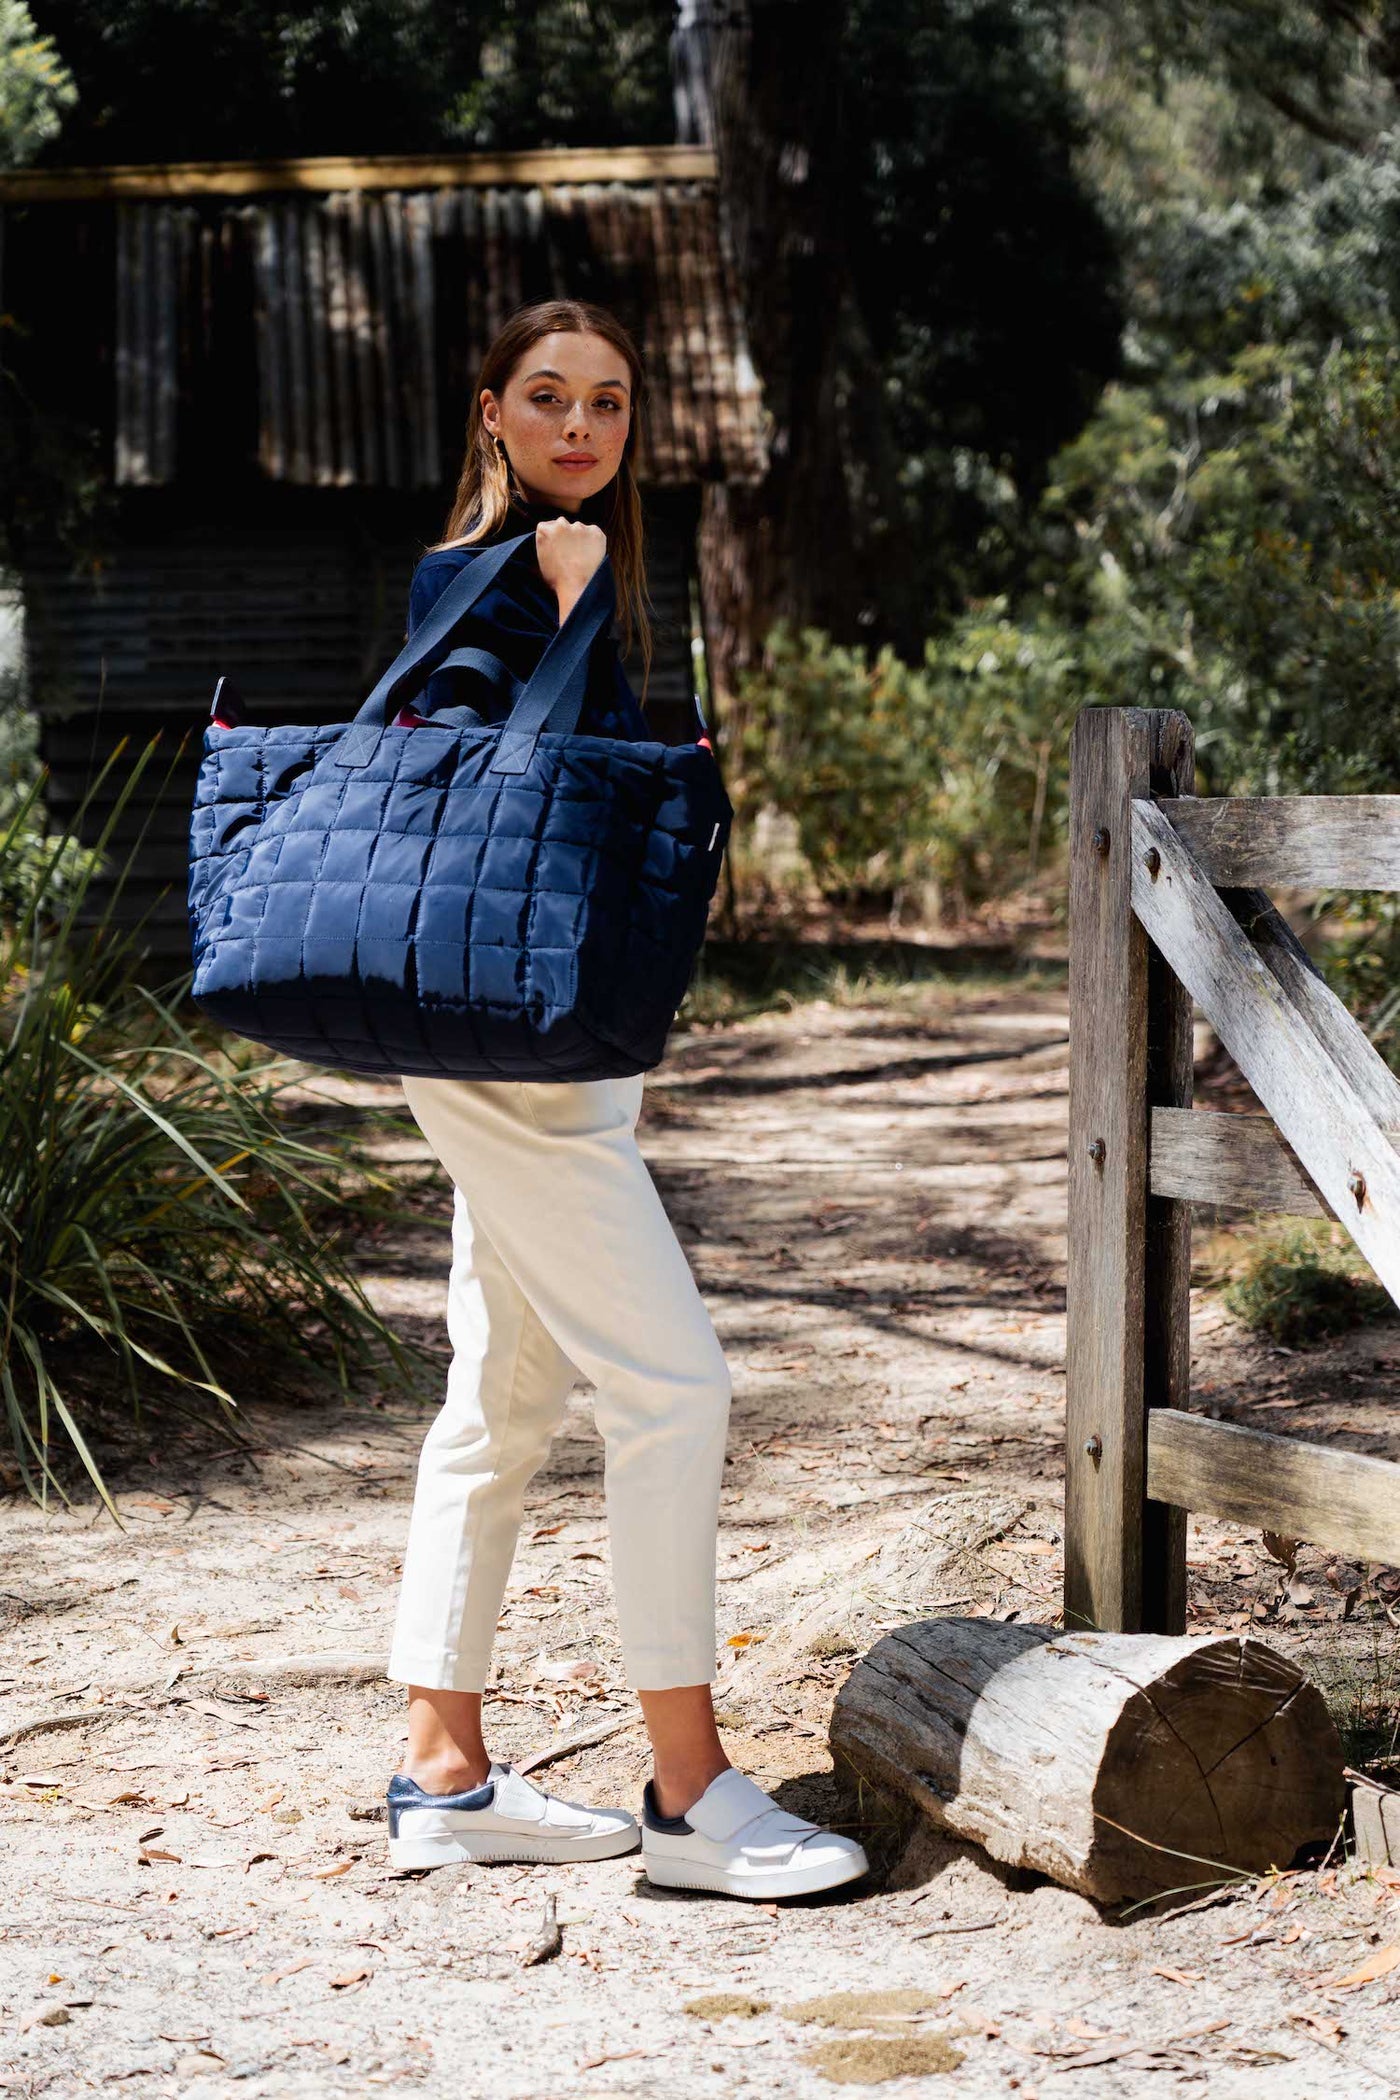 Spencer Carry All - French Navy